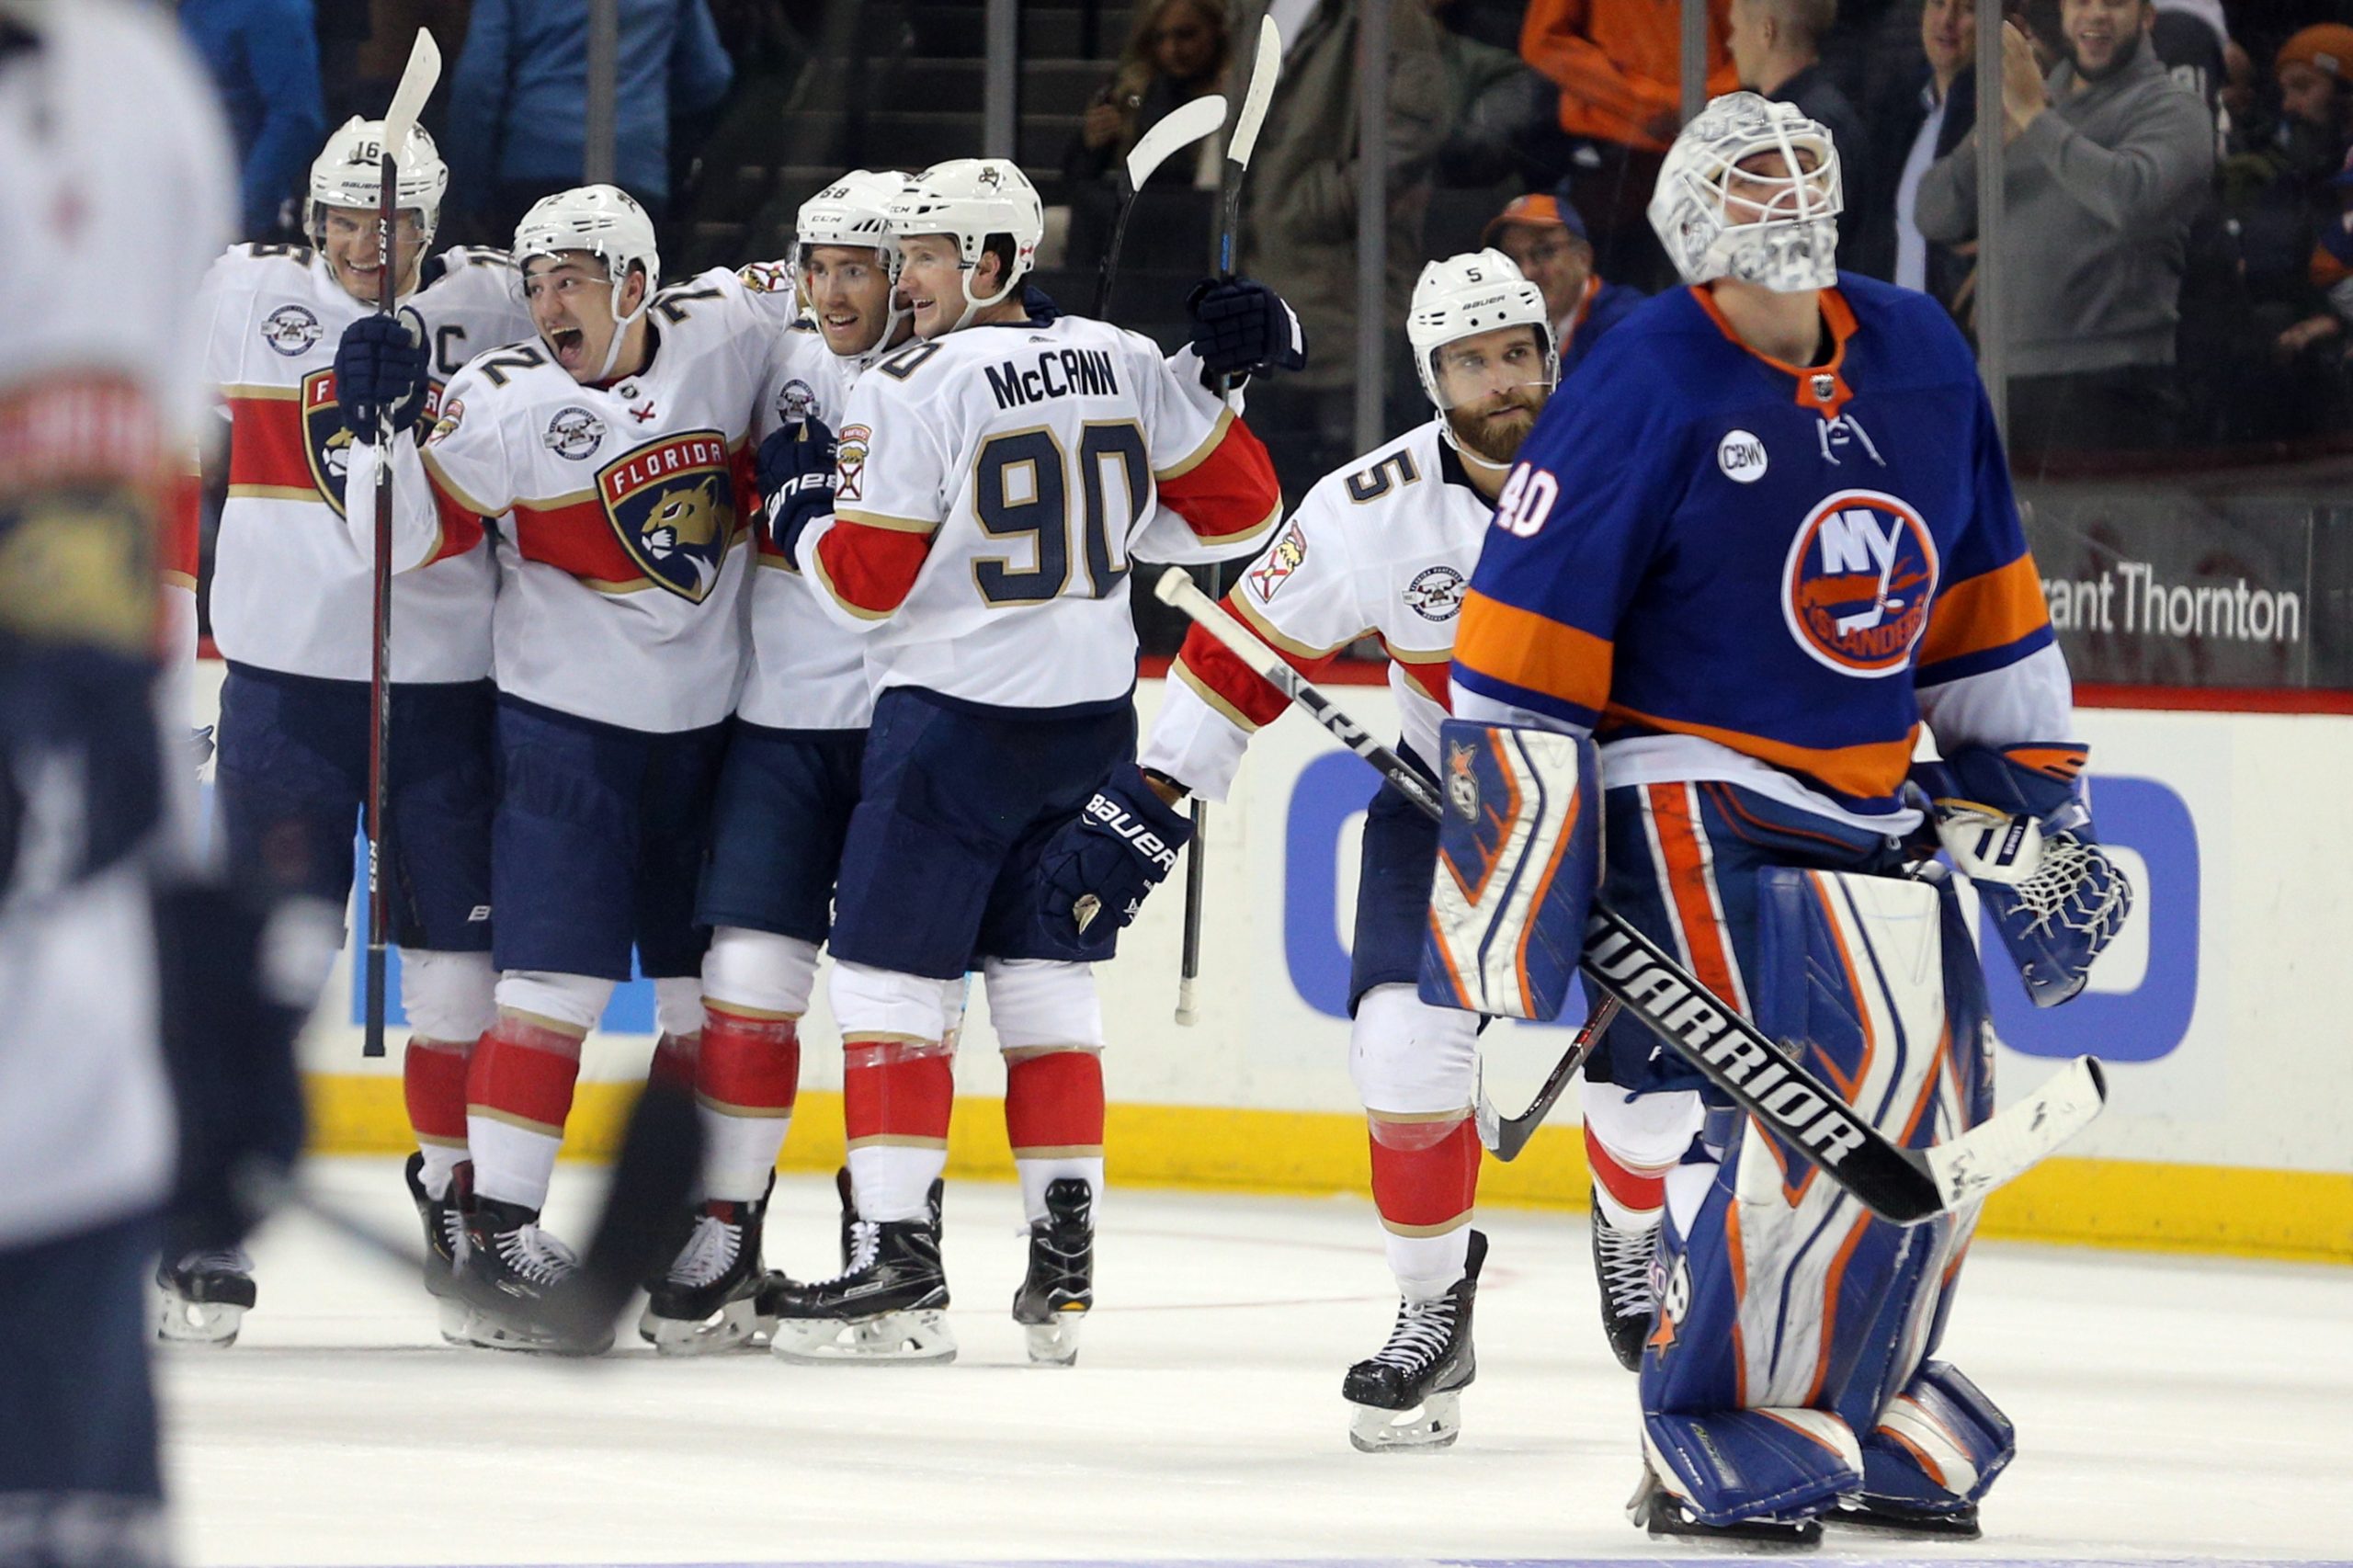 Oct 24, 2018; Brooklyn, NY, USA; Florida Panthers left wing Mike Hoffman (68) celebrates his game winning goal against New York Islanders goaltender Robin Lehner (40) during overtime at Barclays Center. Mandatory Credit: Brad Penner-USA TODAY Sports